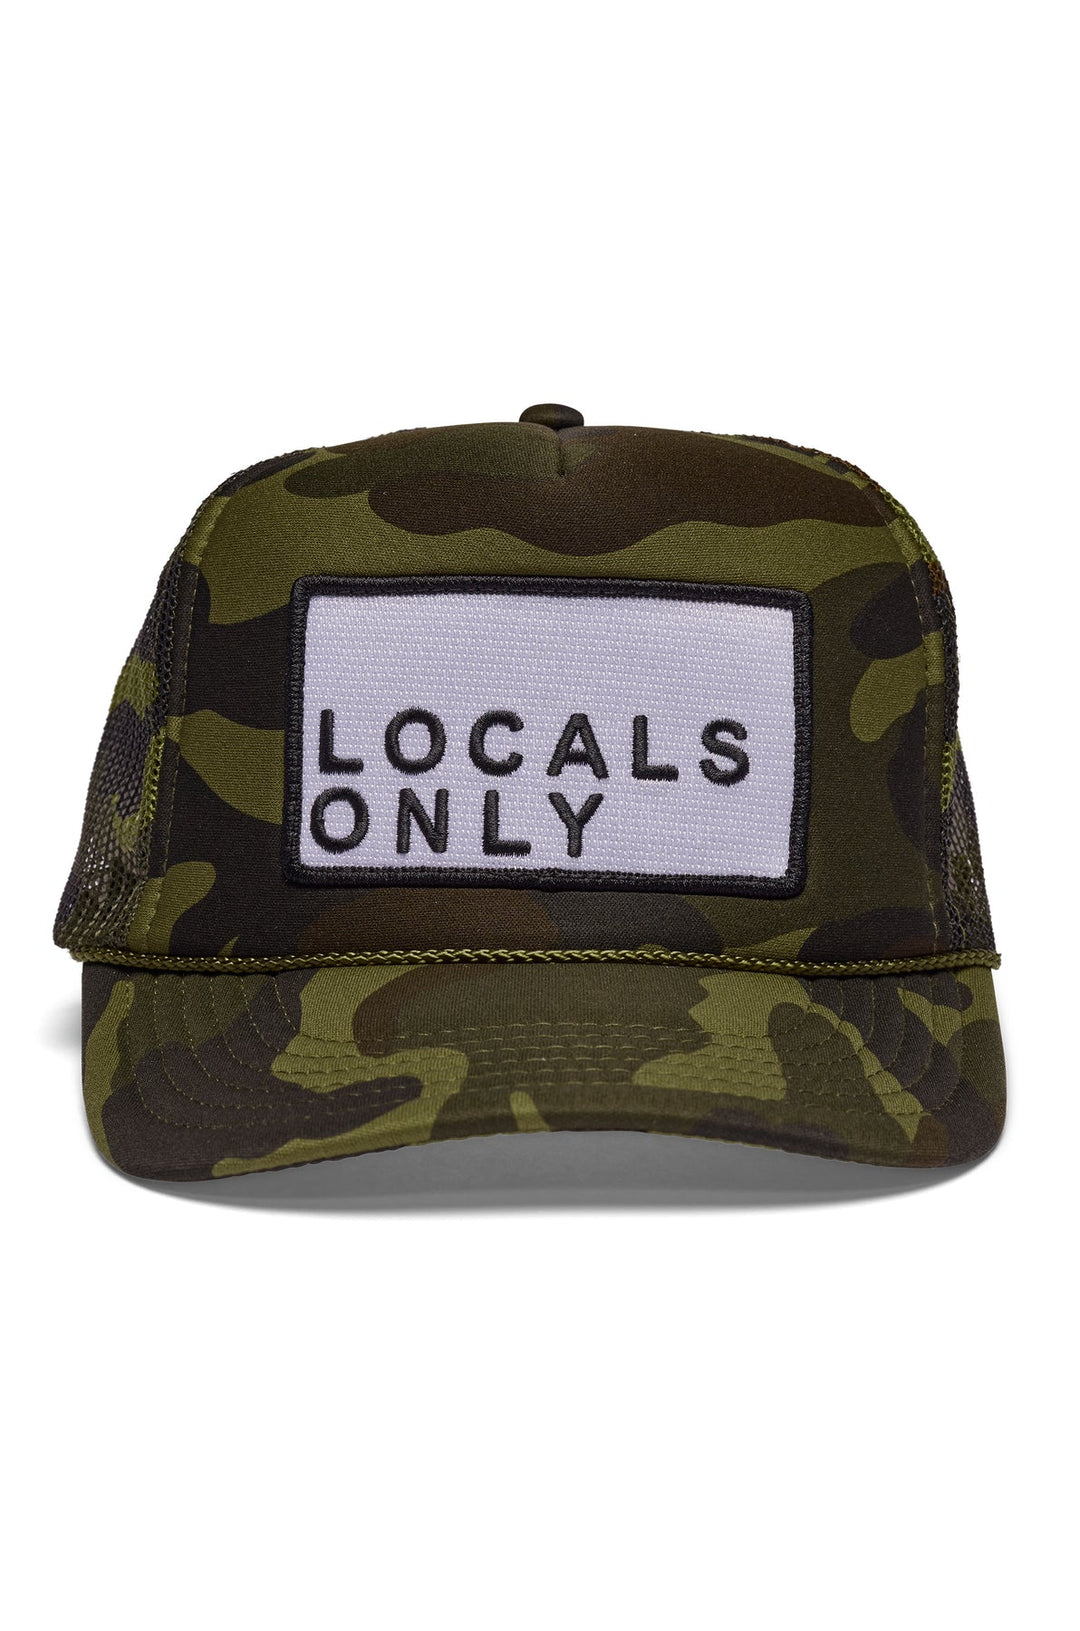 That Friday Feeling Locals Only Hat - CAMO - Sun Diego Boardshop